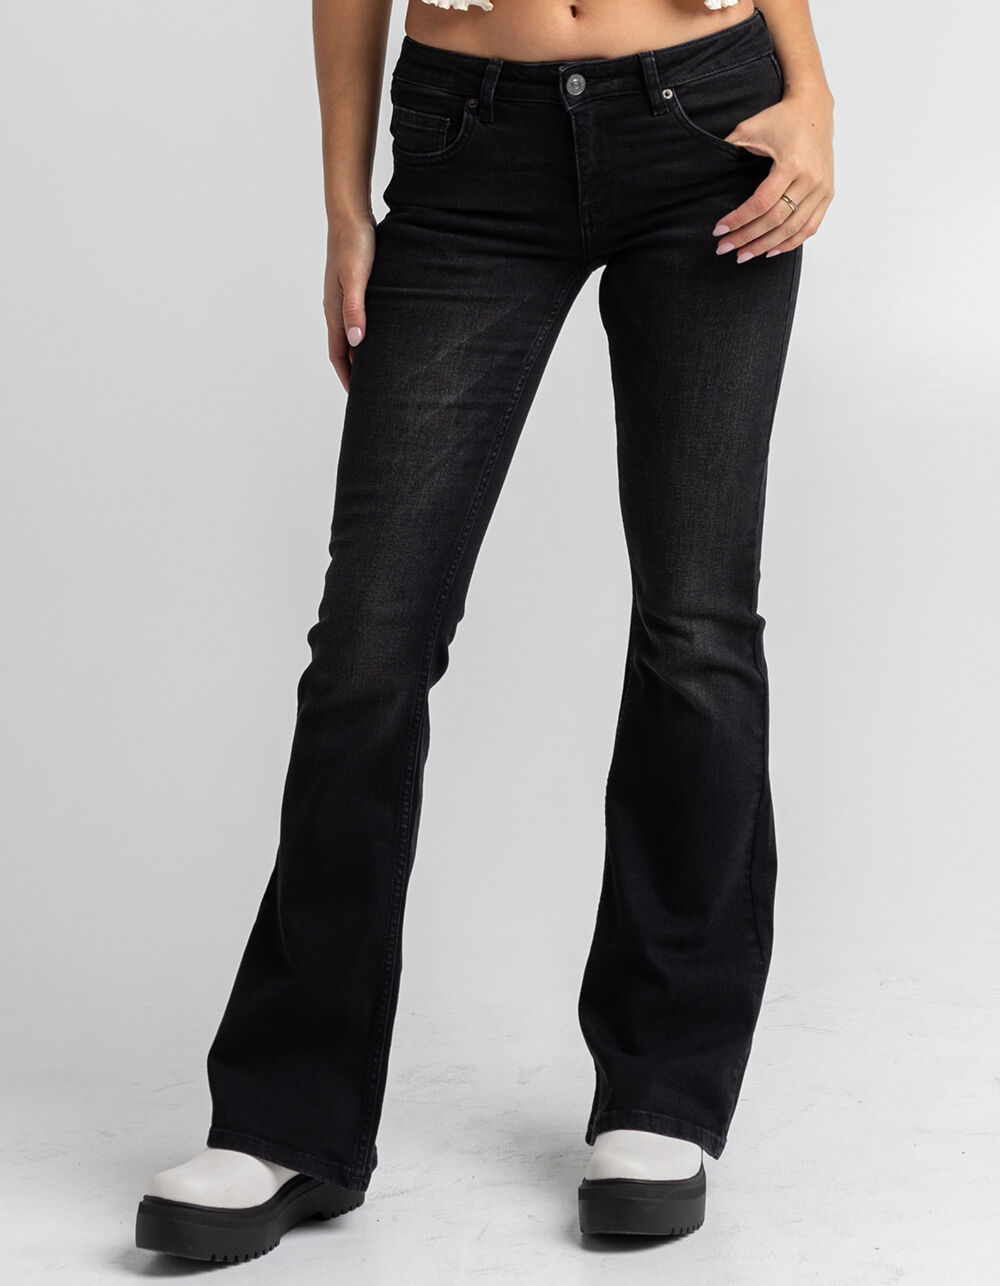 BDG Urban Outfitters Low Rise Stretch Flare Jeans - BLACK | Tillys